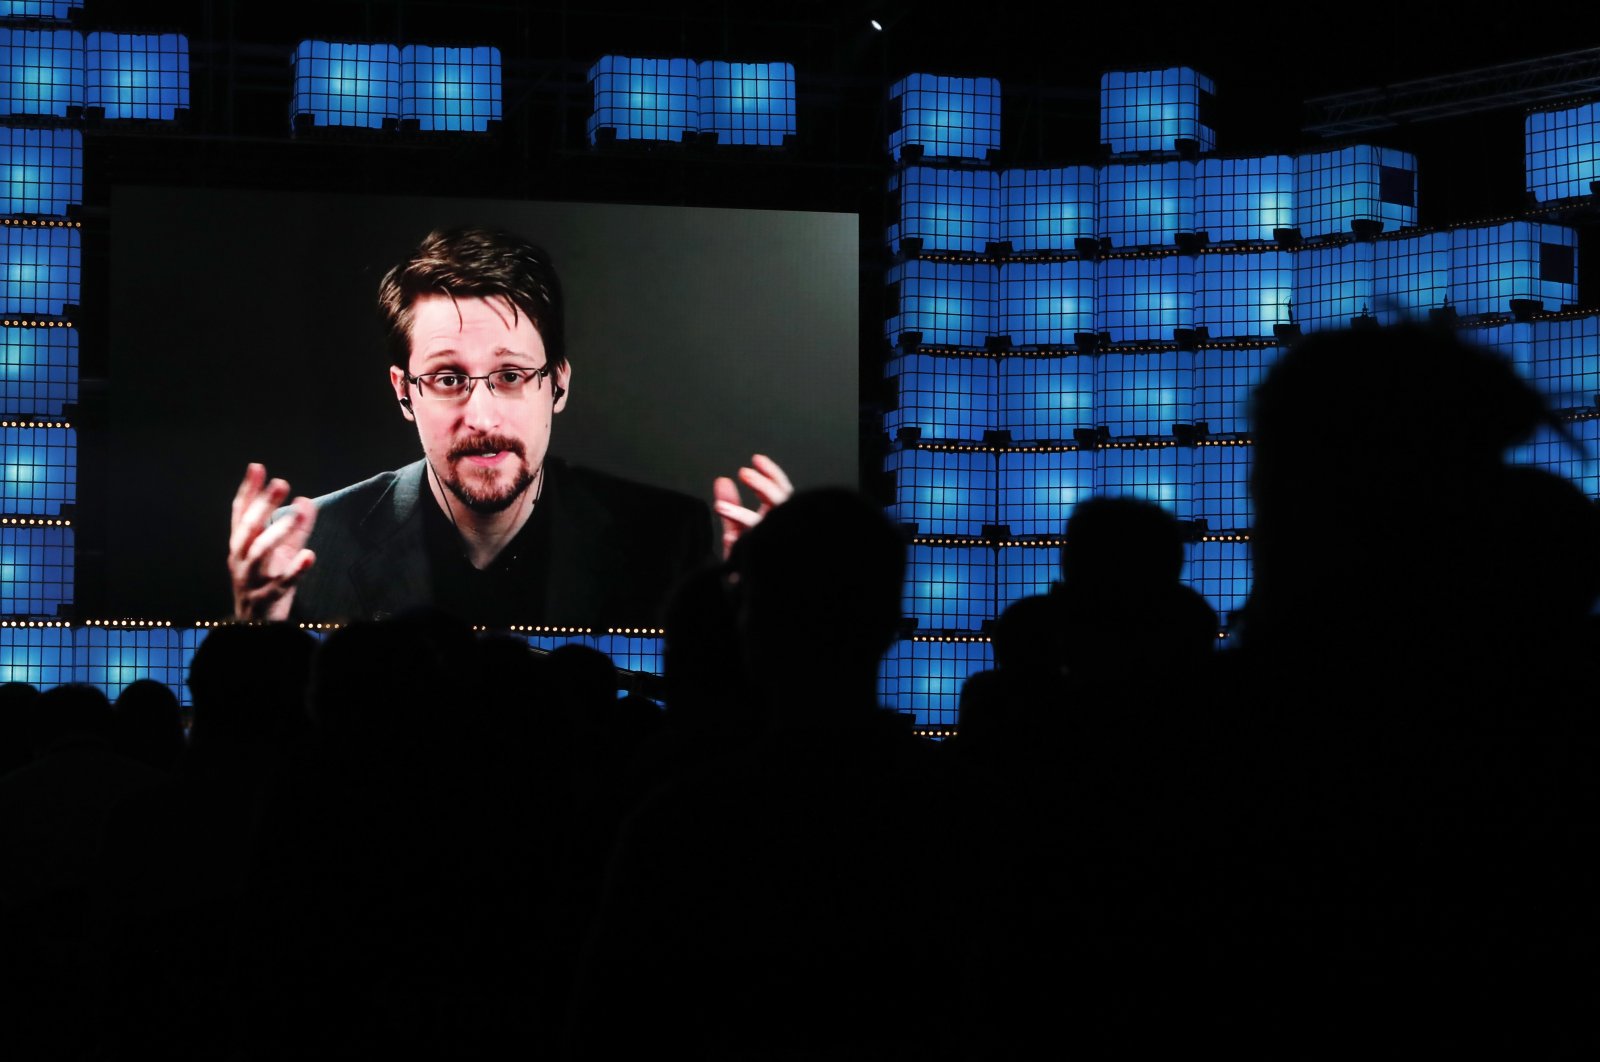 Former U.S. National Security Agency contractor Edward Snowden addresses attendees through video link at the Web Summit technology conference in Lisbon, Monday, Nov. 4, 2019. (AP File Photo)